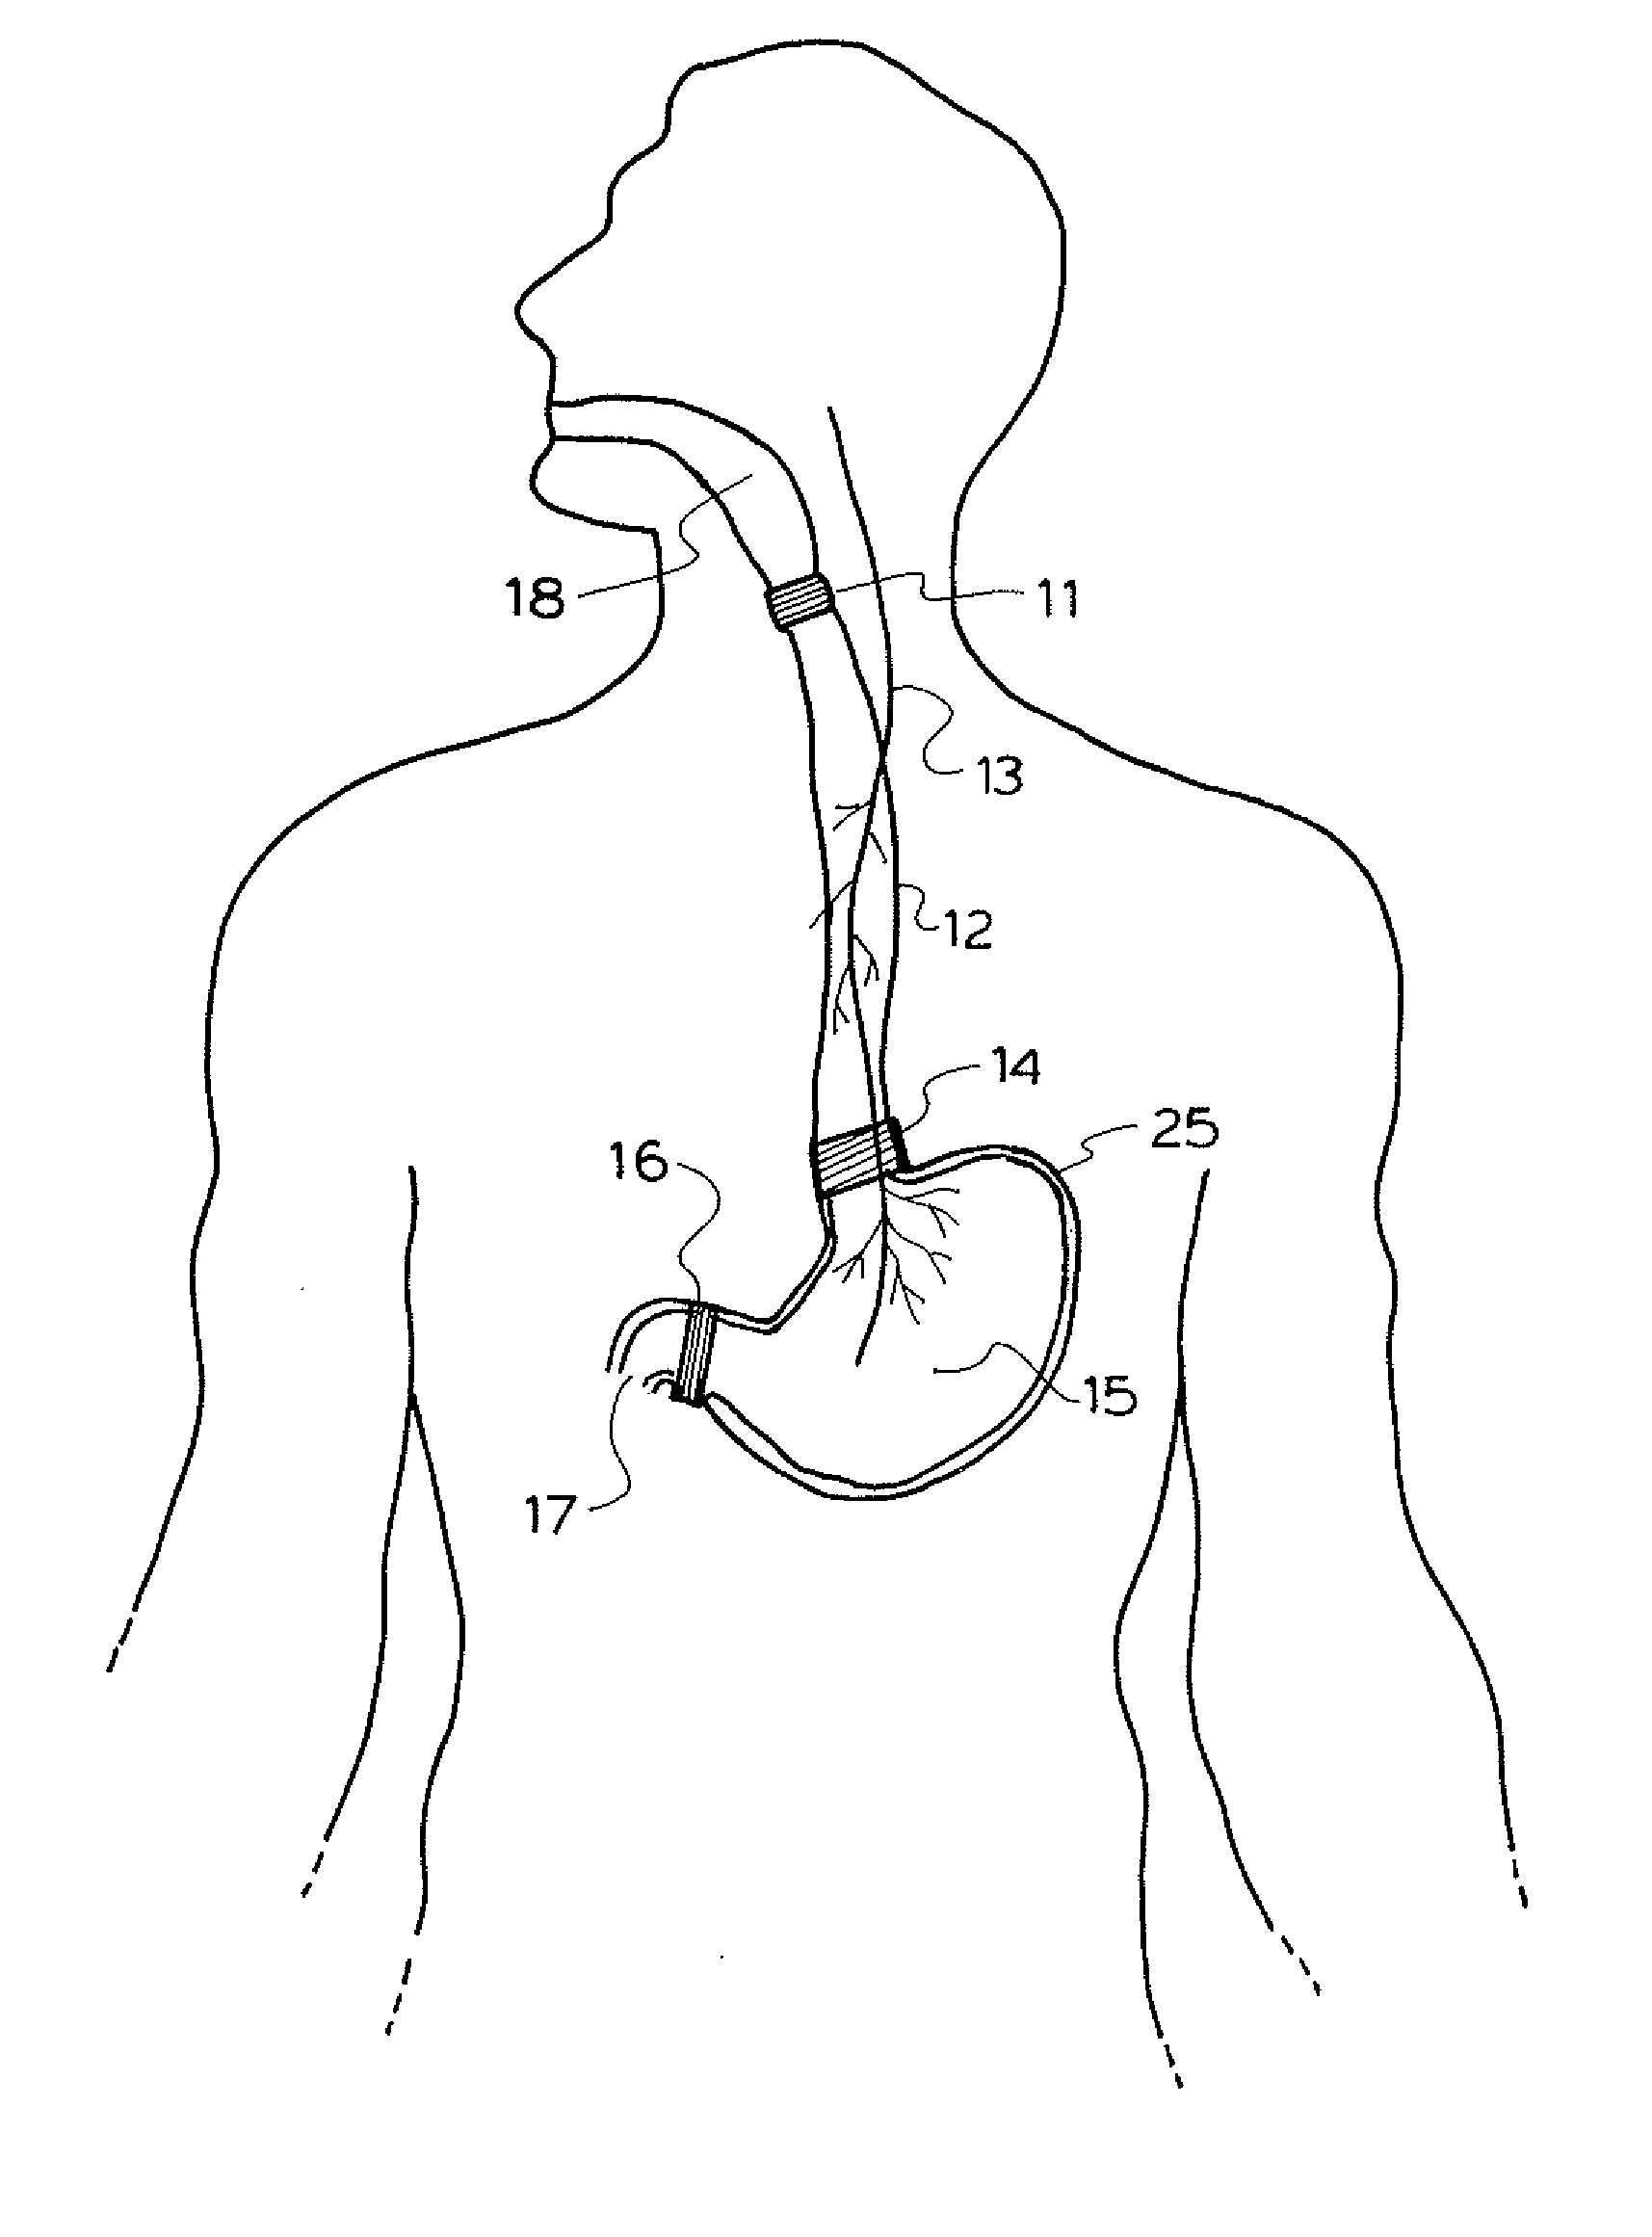 Method and apparatus for treatment of the gastrointestinal tract